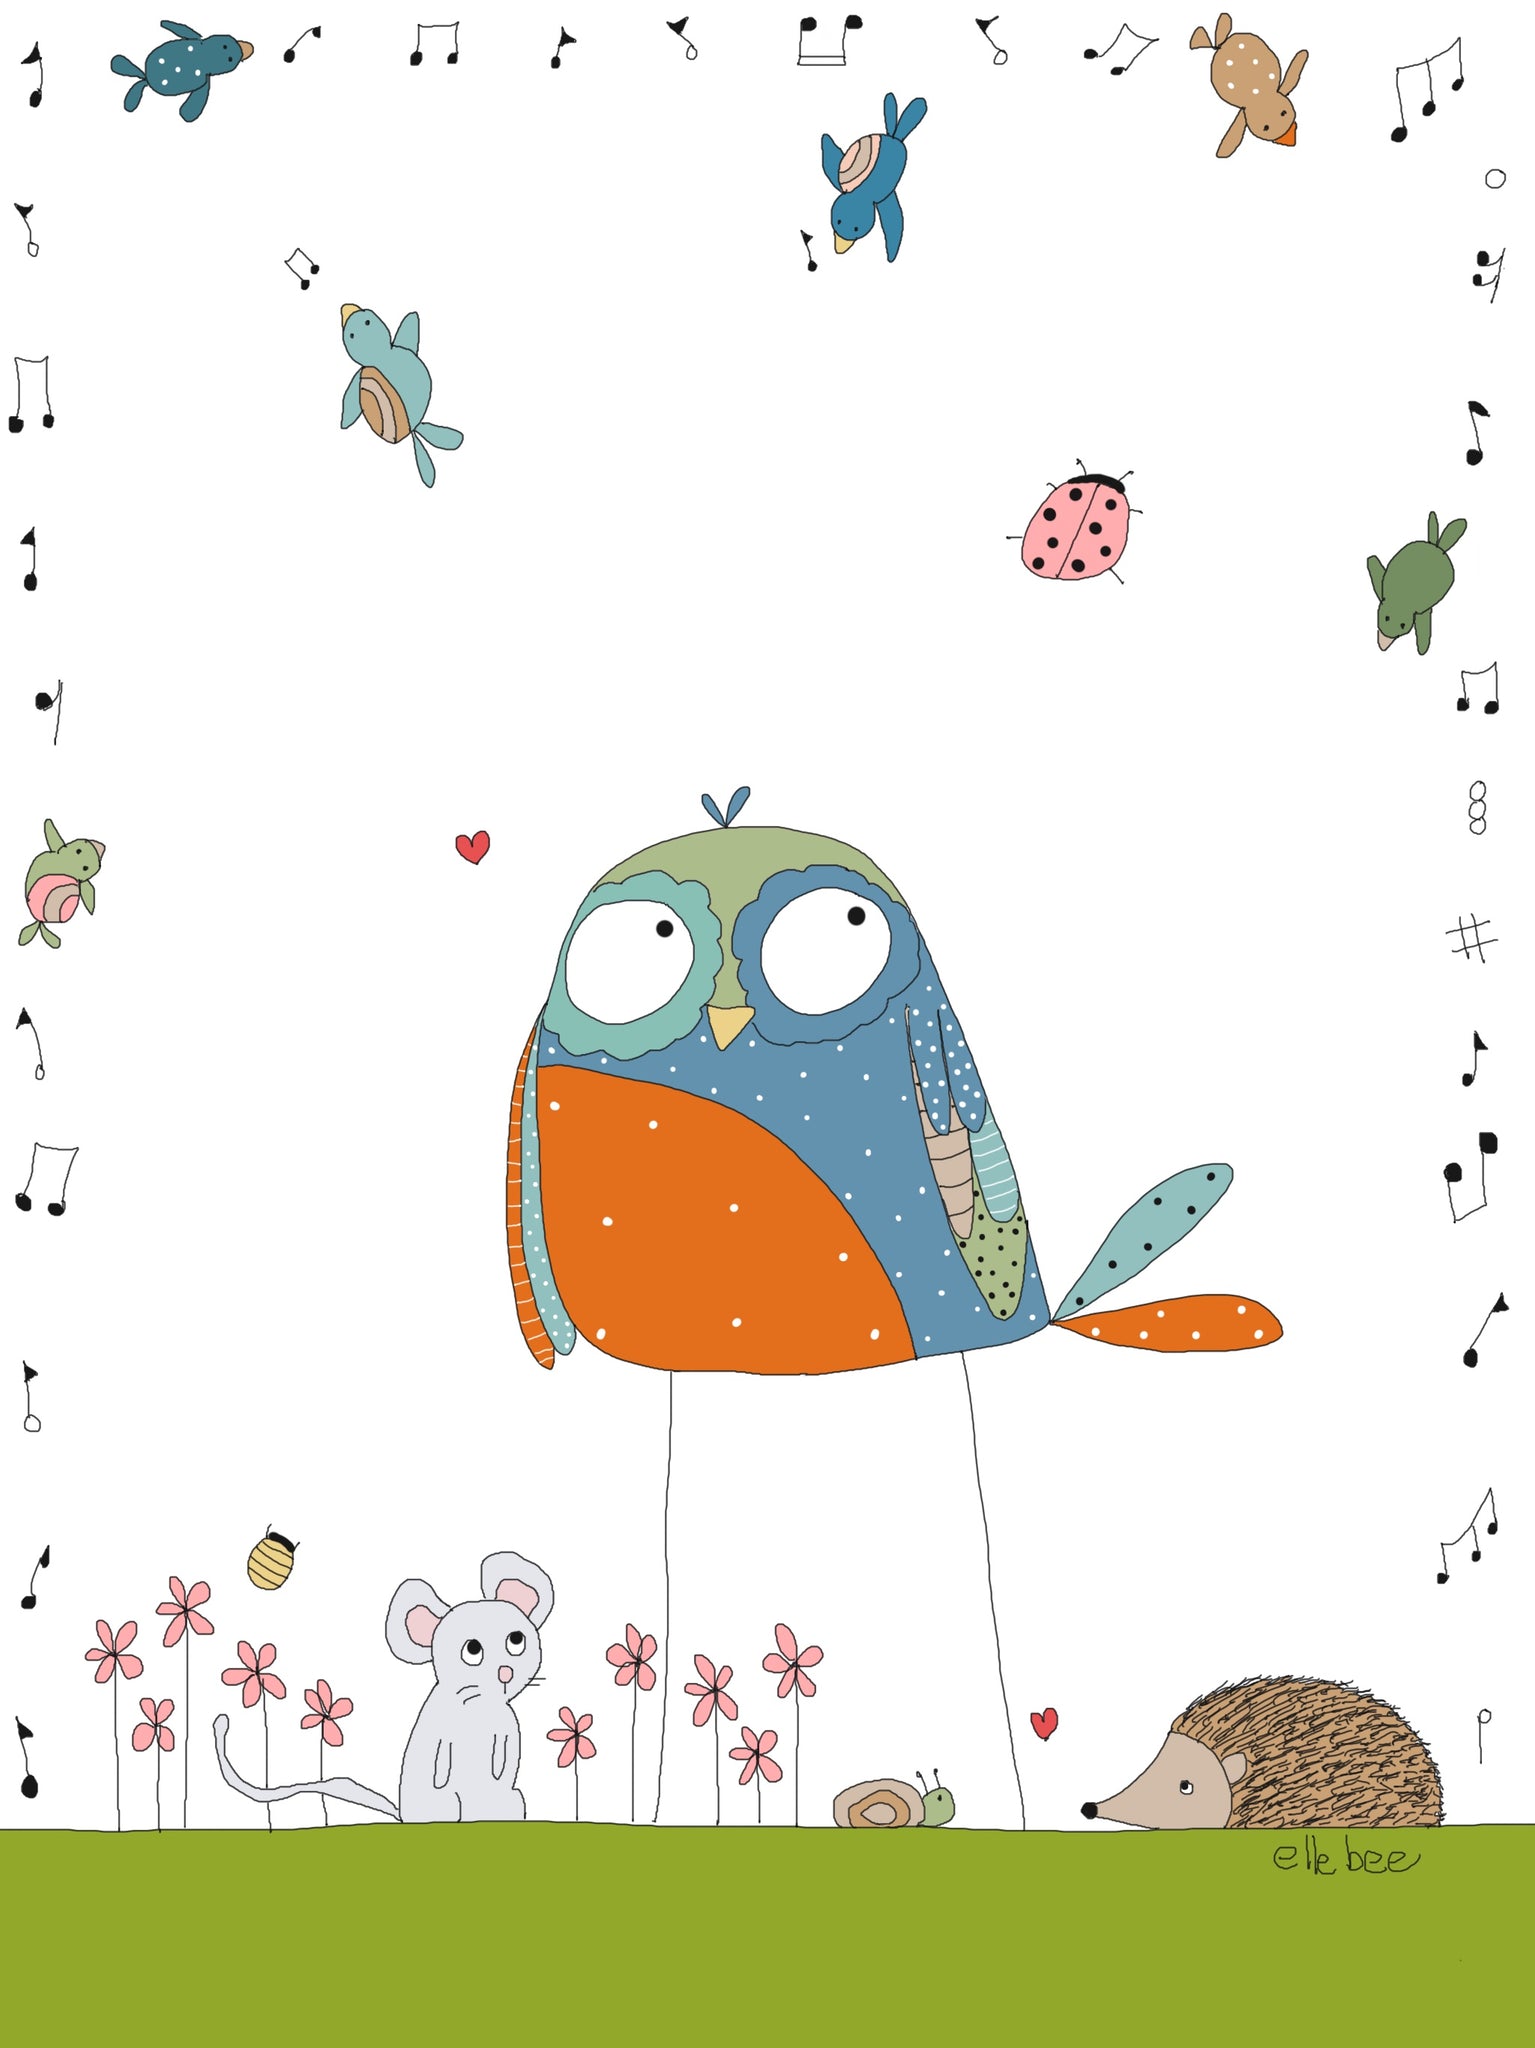 Greeting card “Sing me a song”